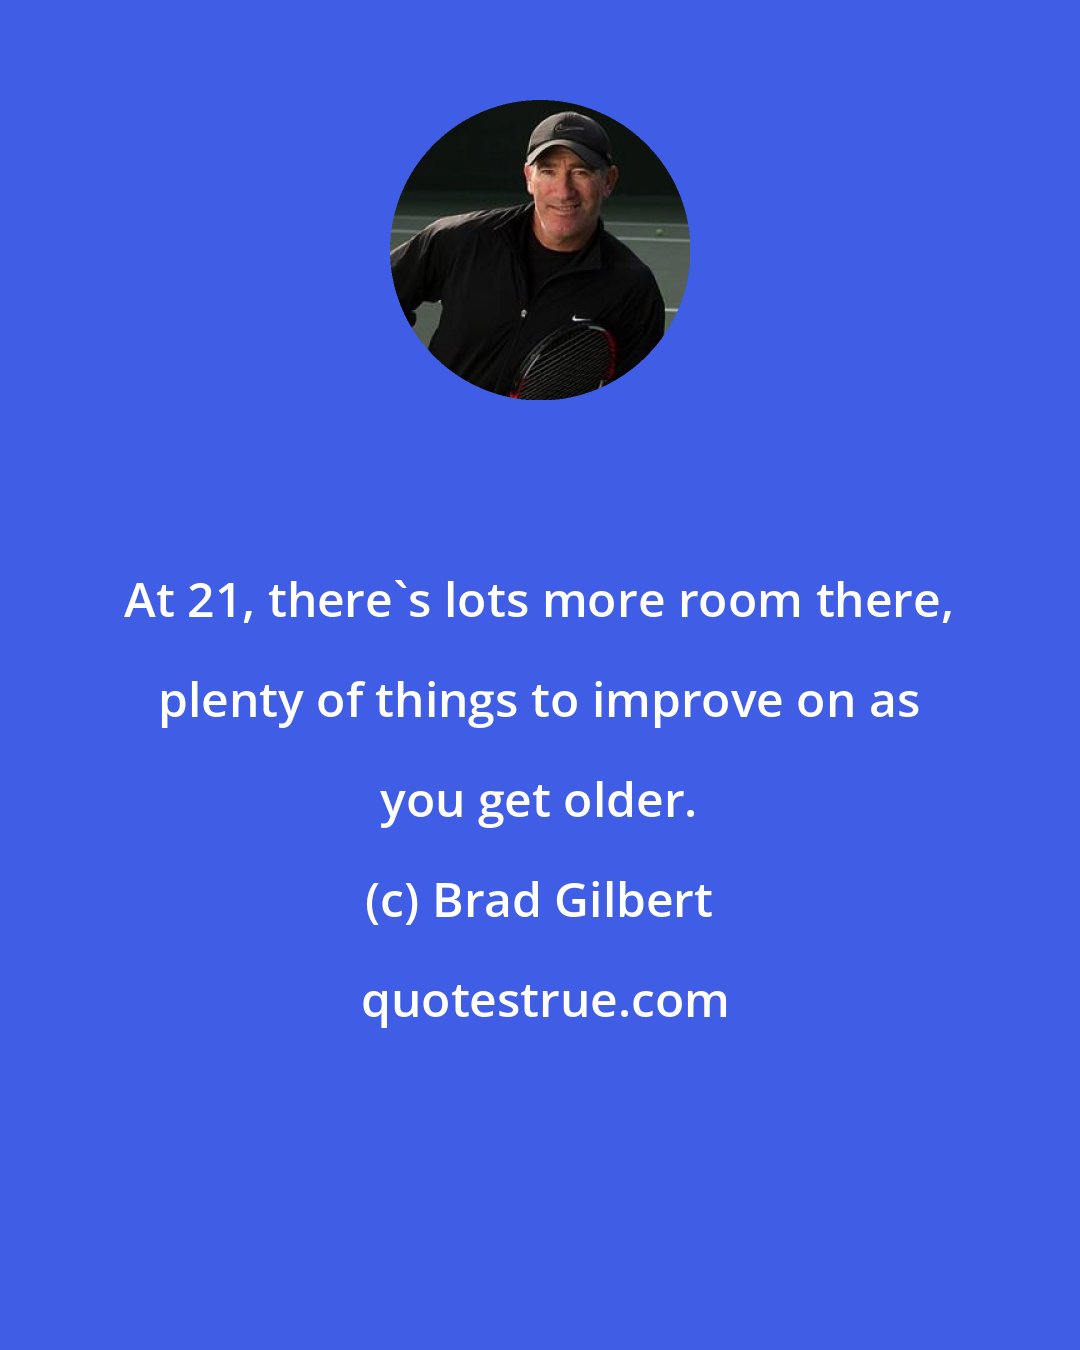 Brad Gilbert: At 21, there's lots more room there, plenty of things to improve on as you get older.